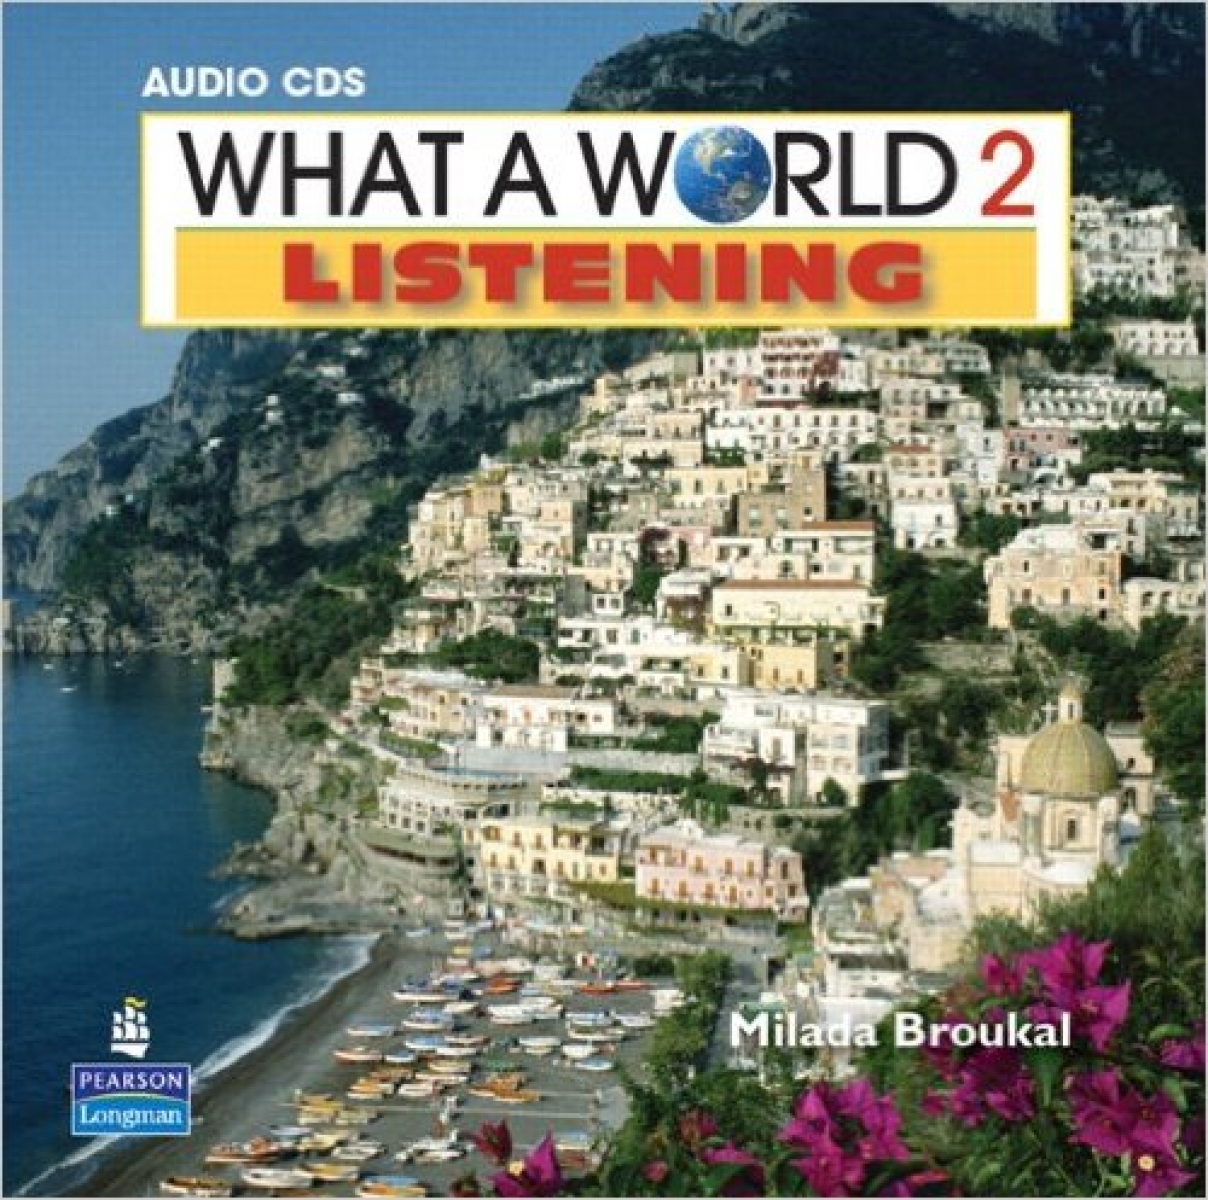 Broukal, Milada What a World Listening 2 CD Audio 